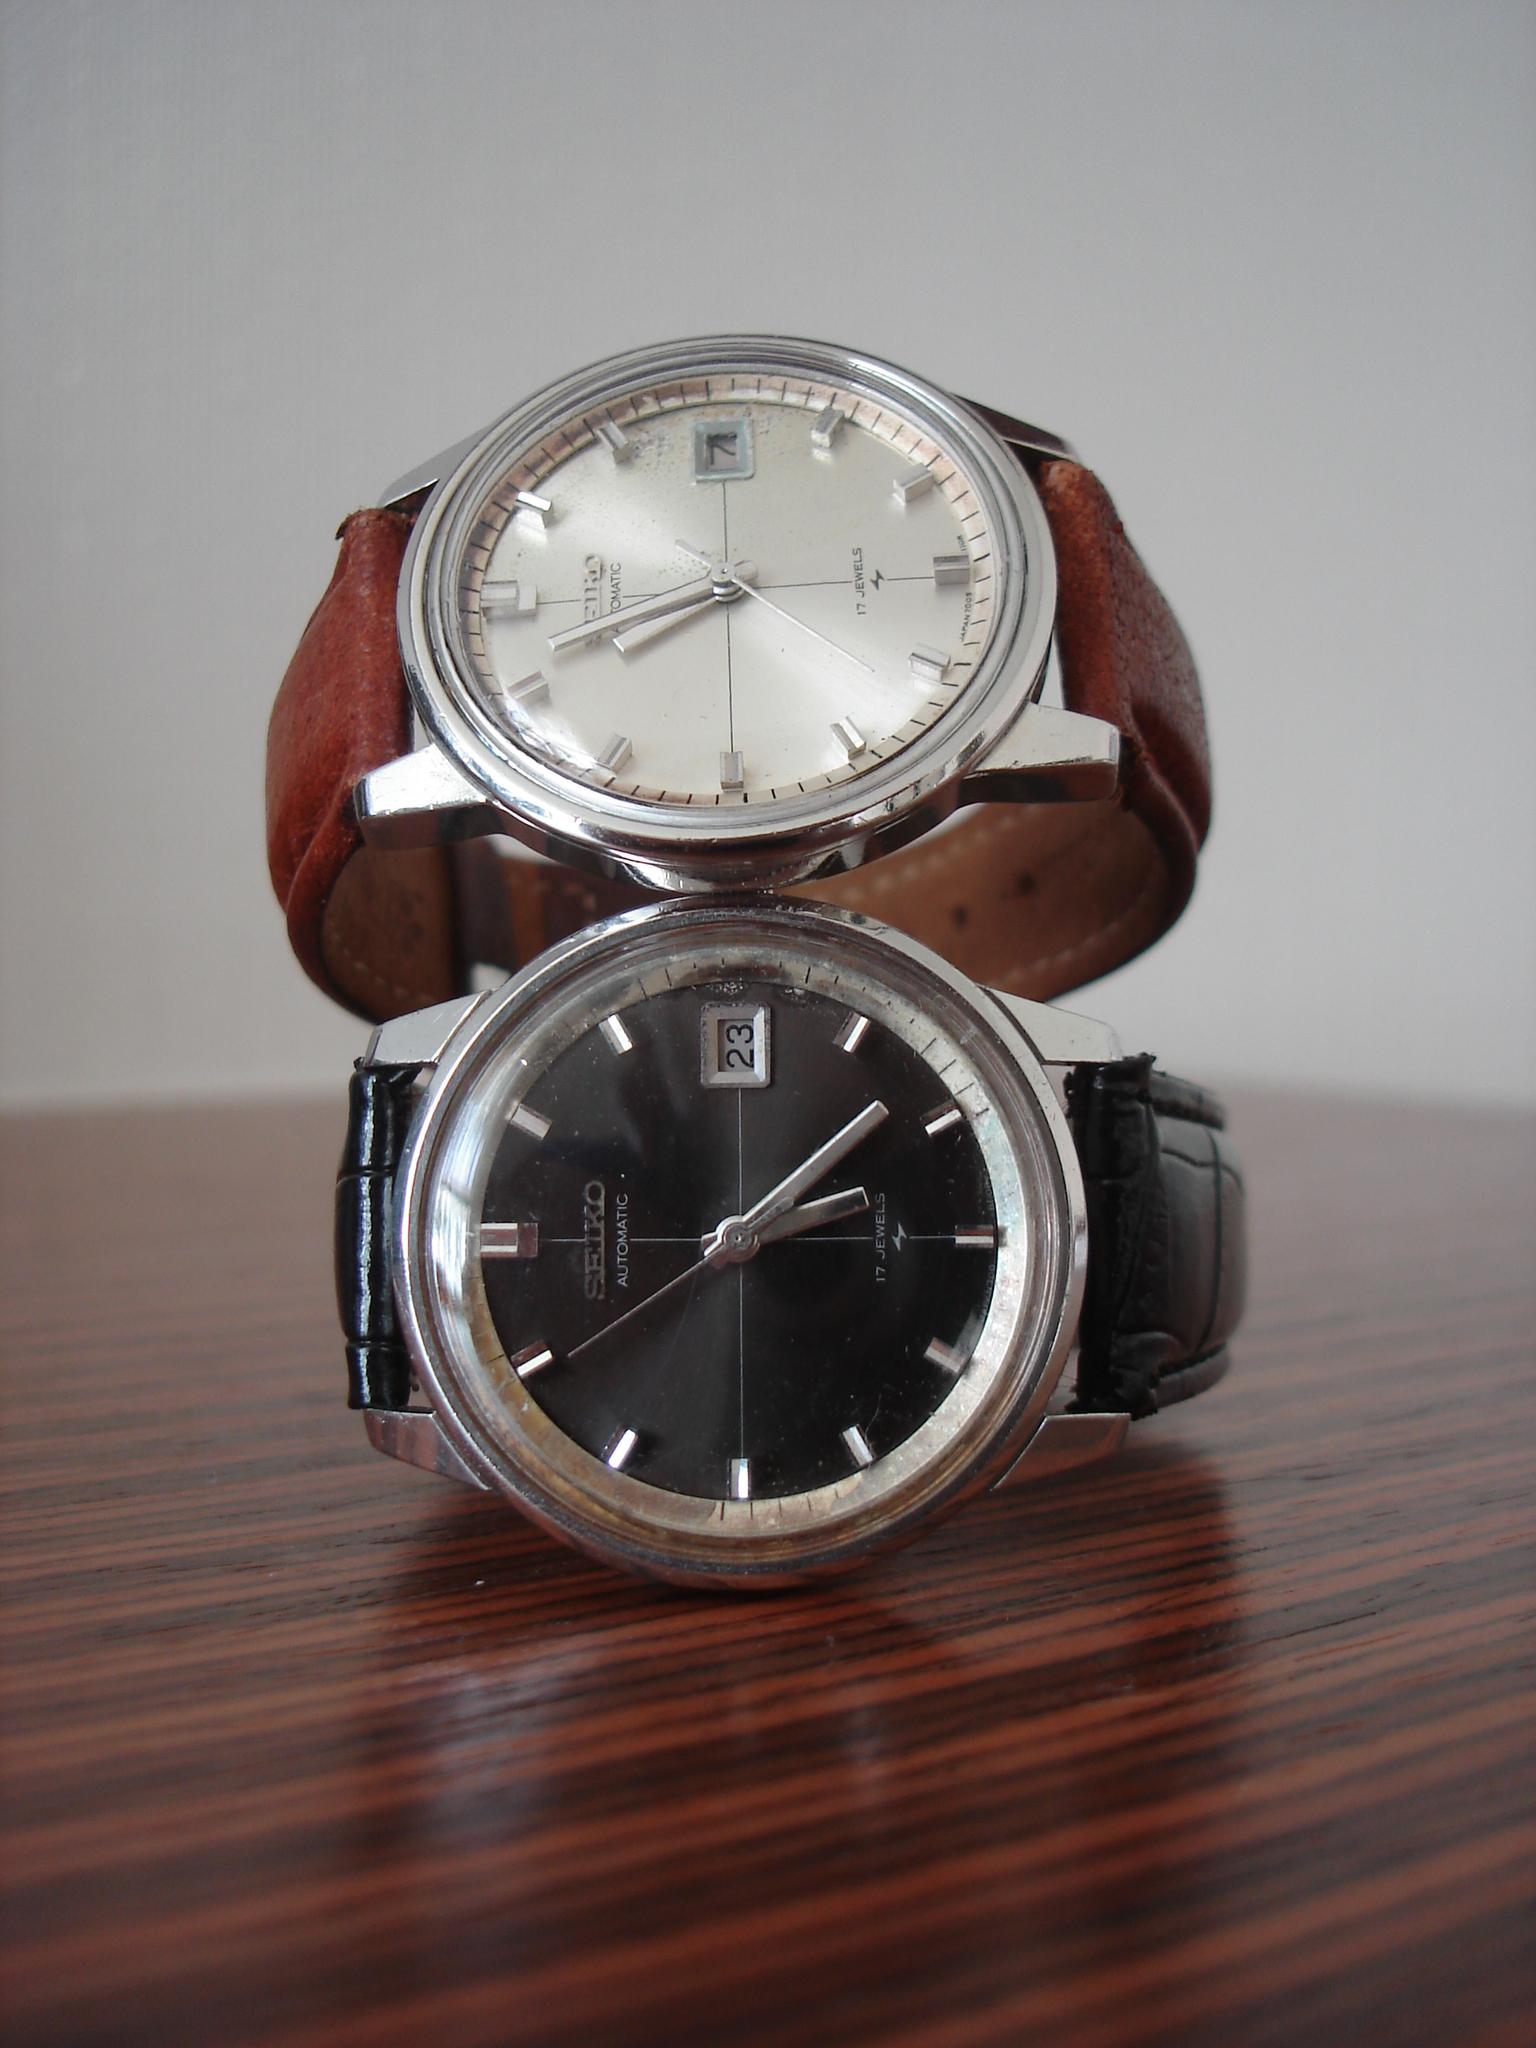 Review: Seiko 7005-8070 (1970s Vintage) – How To Build A Watch Collection